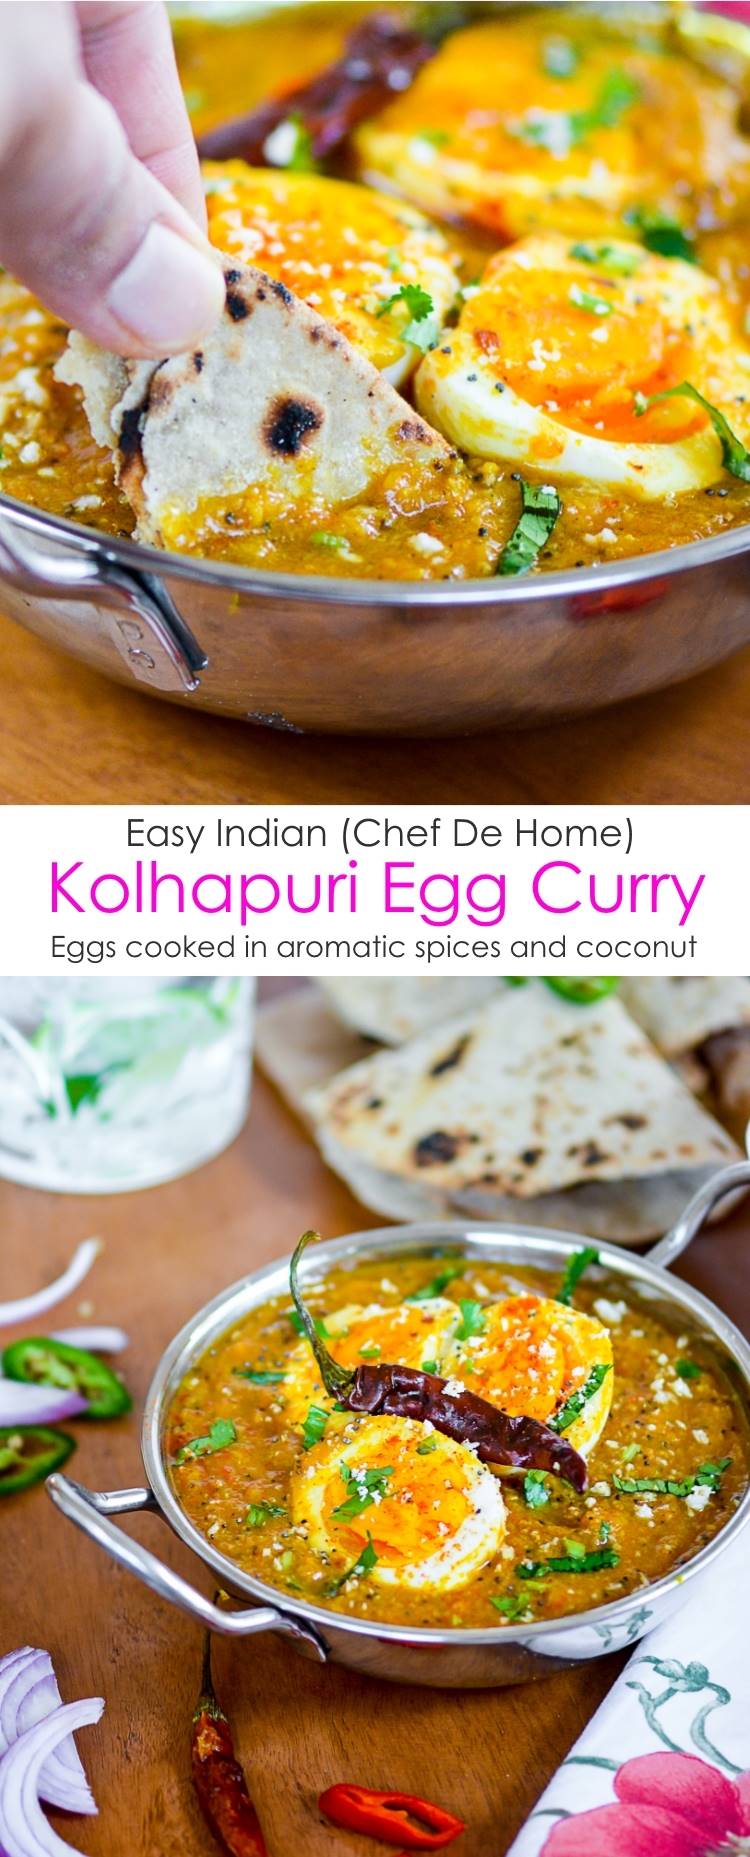 Enjoy Easy Indian Kolhapuri Egg Curry with Homemade Indian Roti for Dinner | chefdehome.com